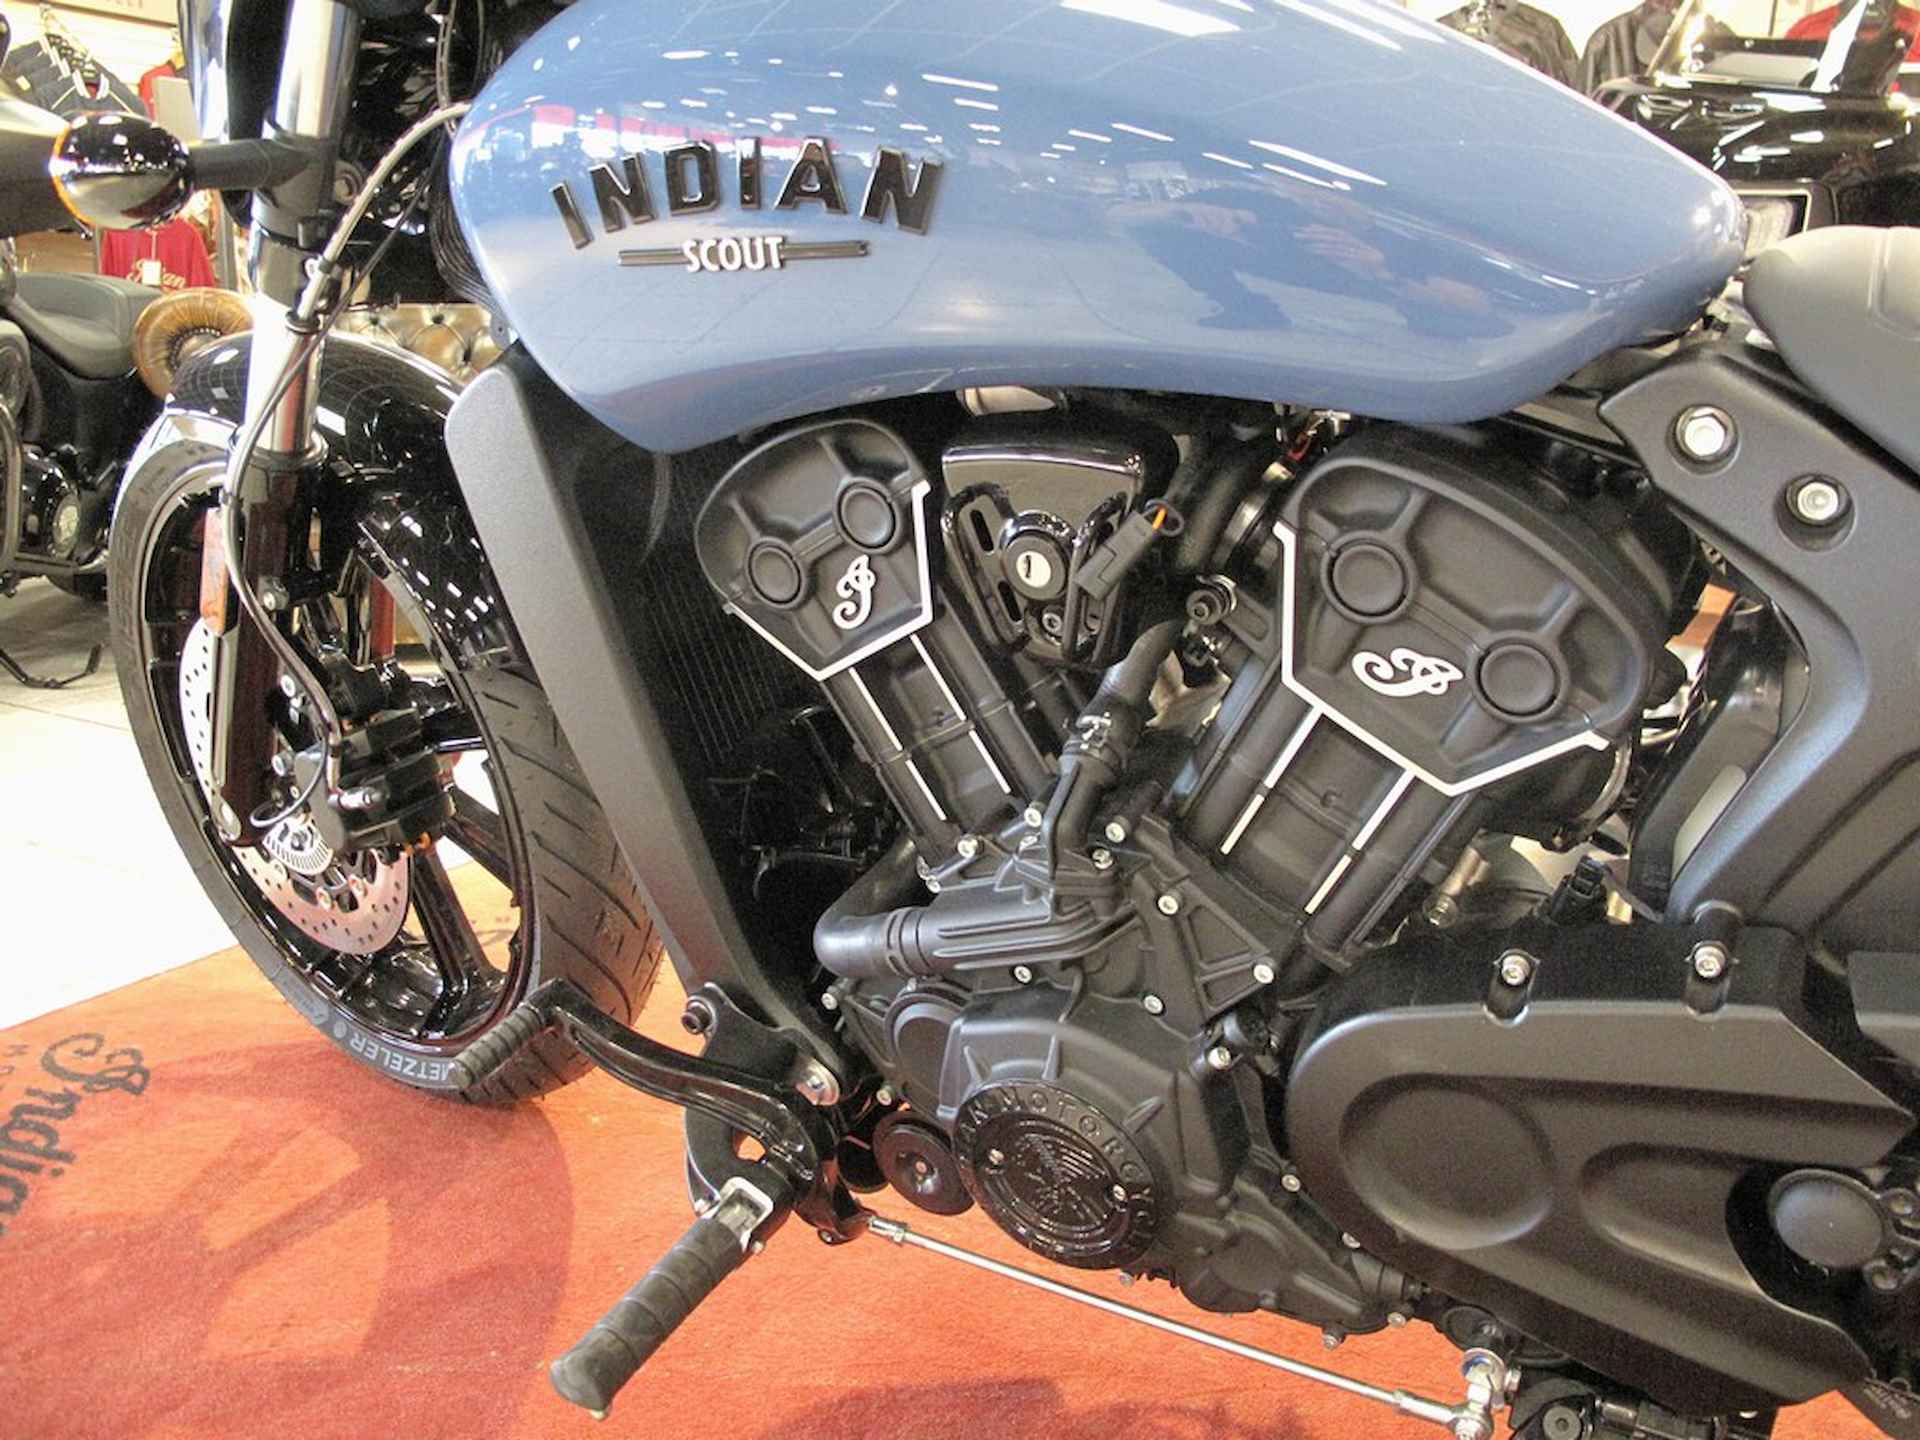 Indian Scout Rogue Official Indiasn Motorcycle Dealer - 5/11